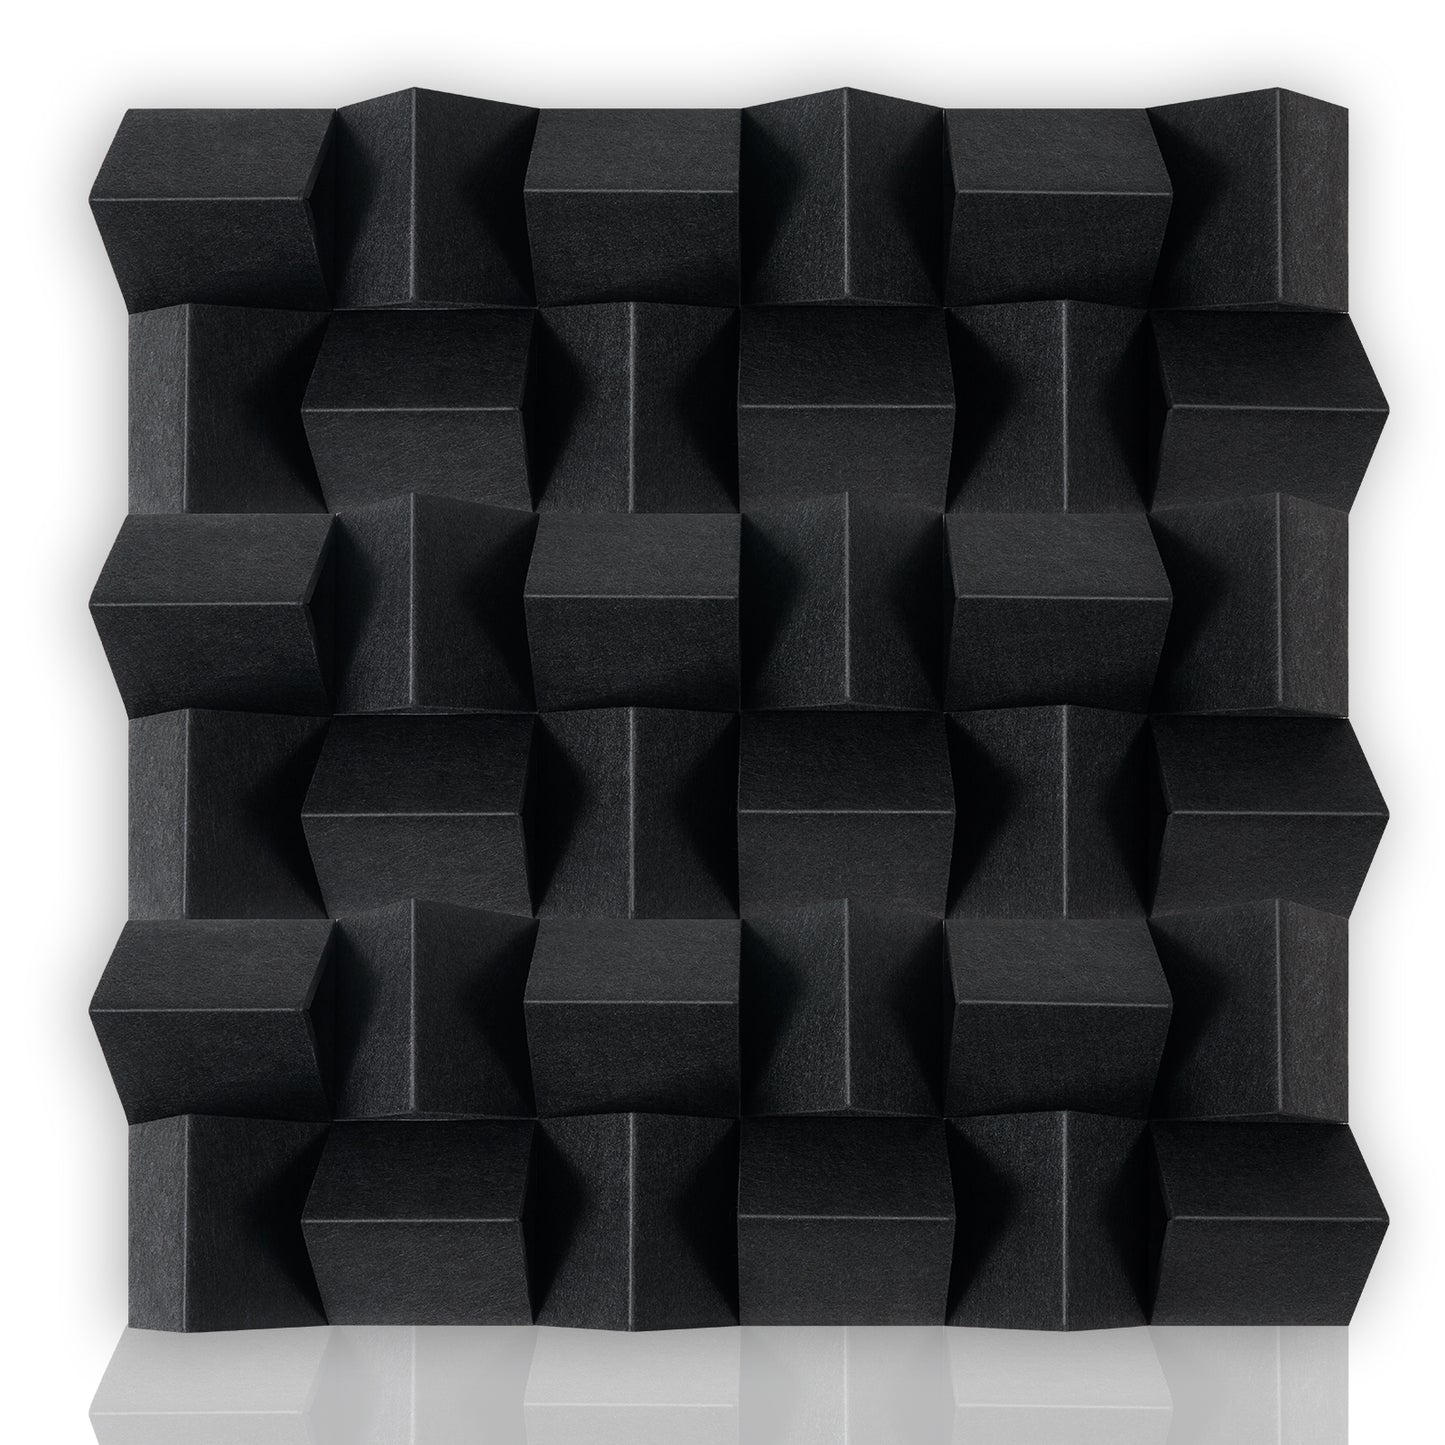 Bubos 36 pcs Acoustic Diffusers 24*24 inches